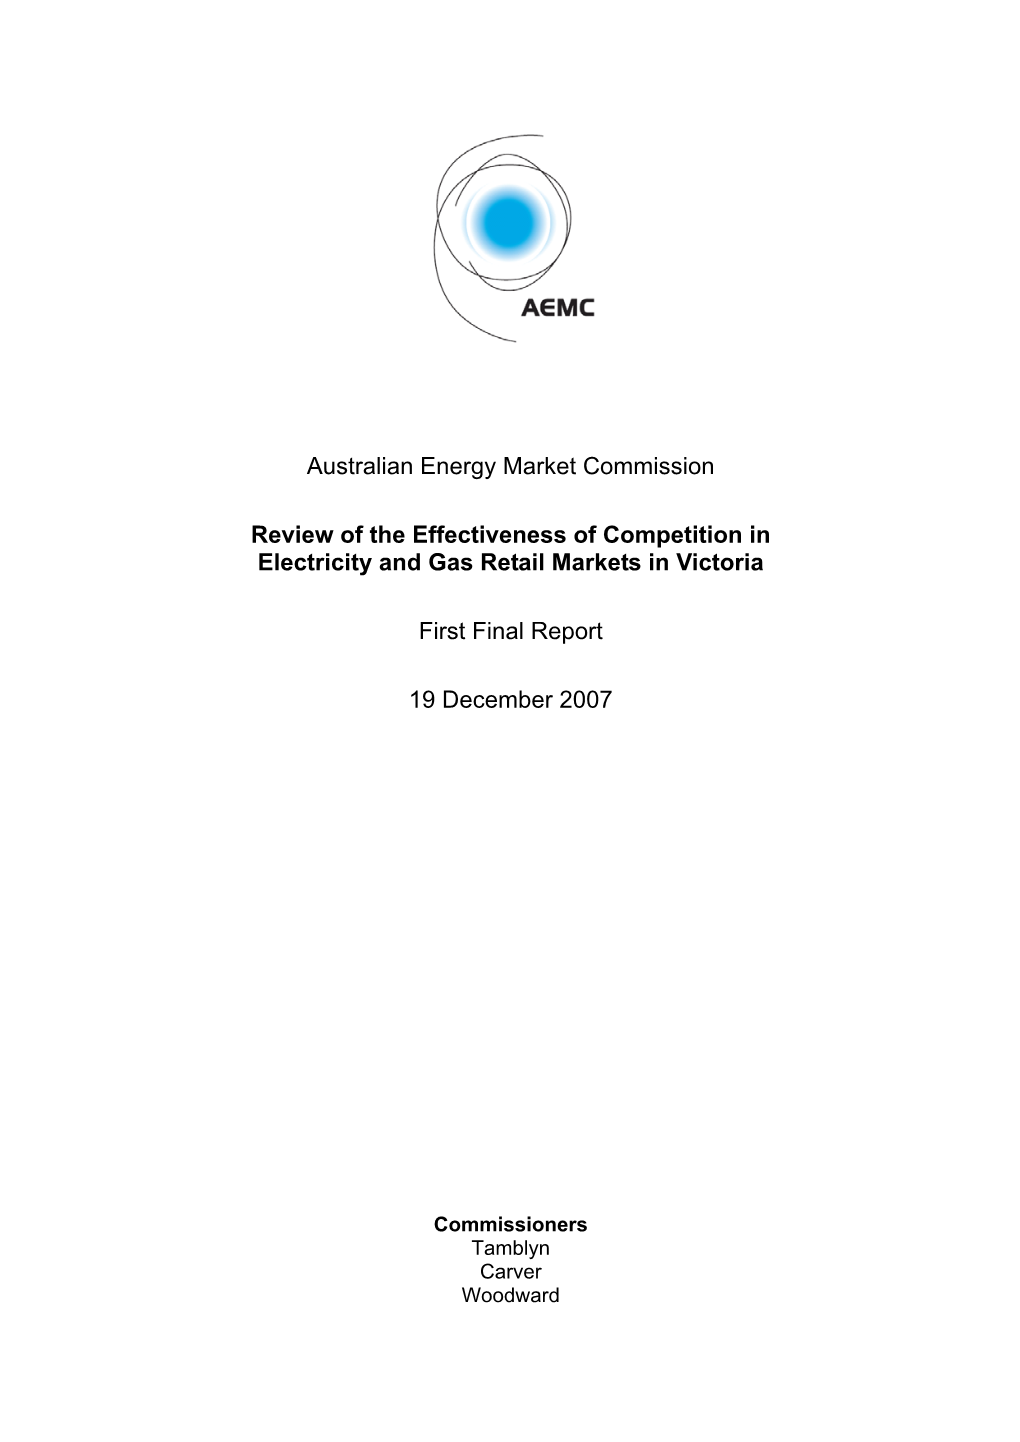 Australian Energy Market Commission Review of the Effectiveness of Competition in Electricity and Gas Retail Markets in Victoria